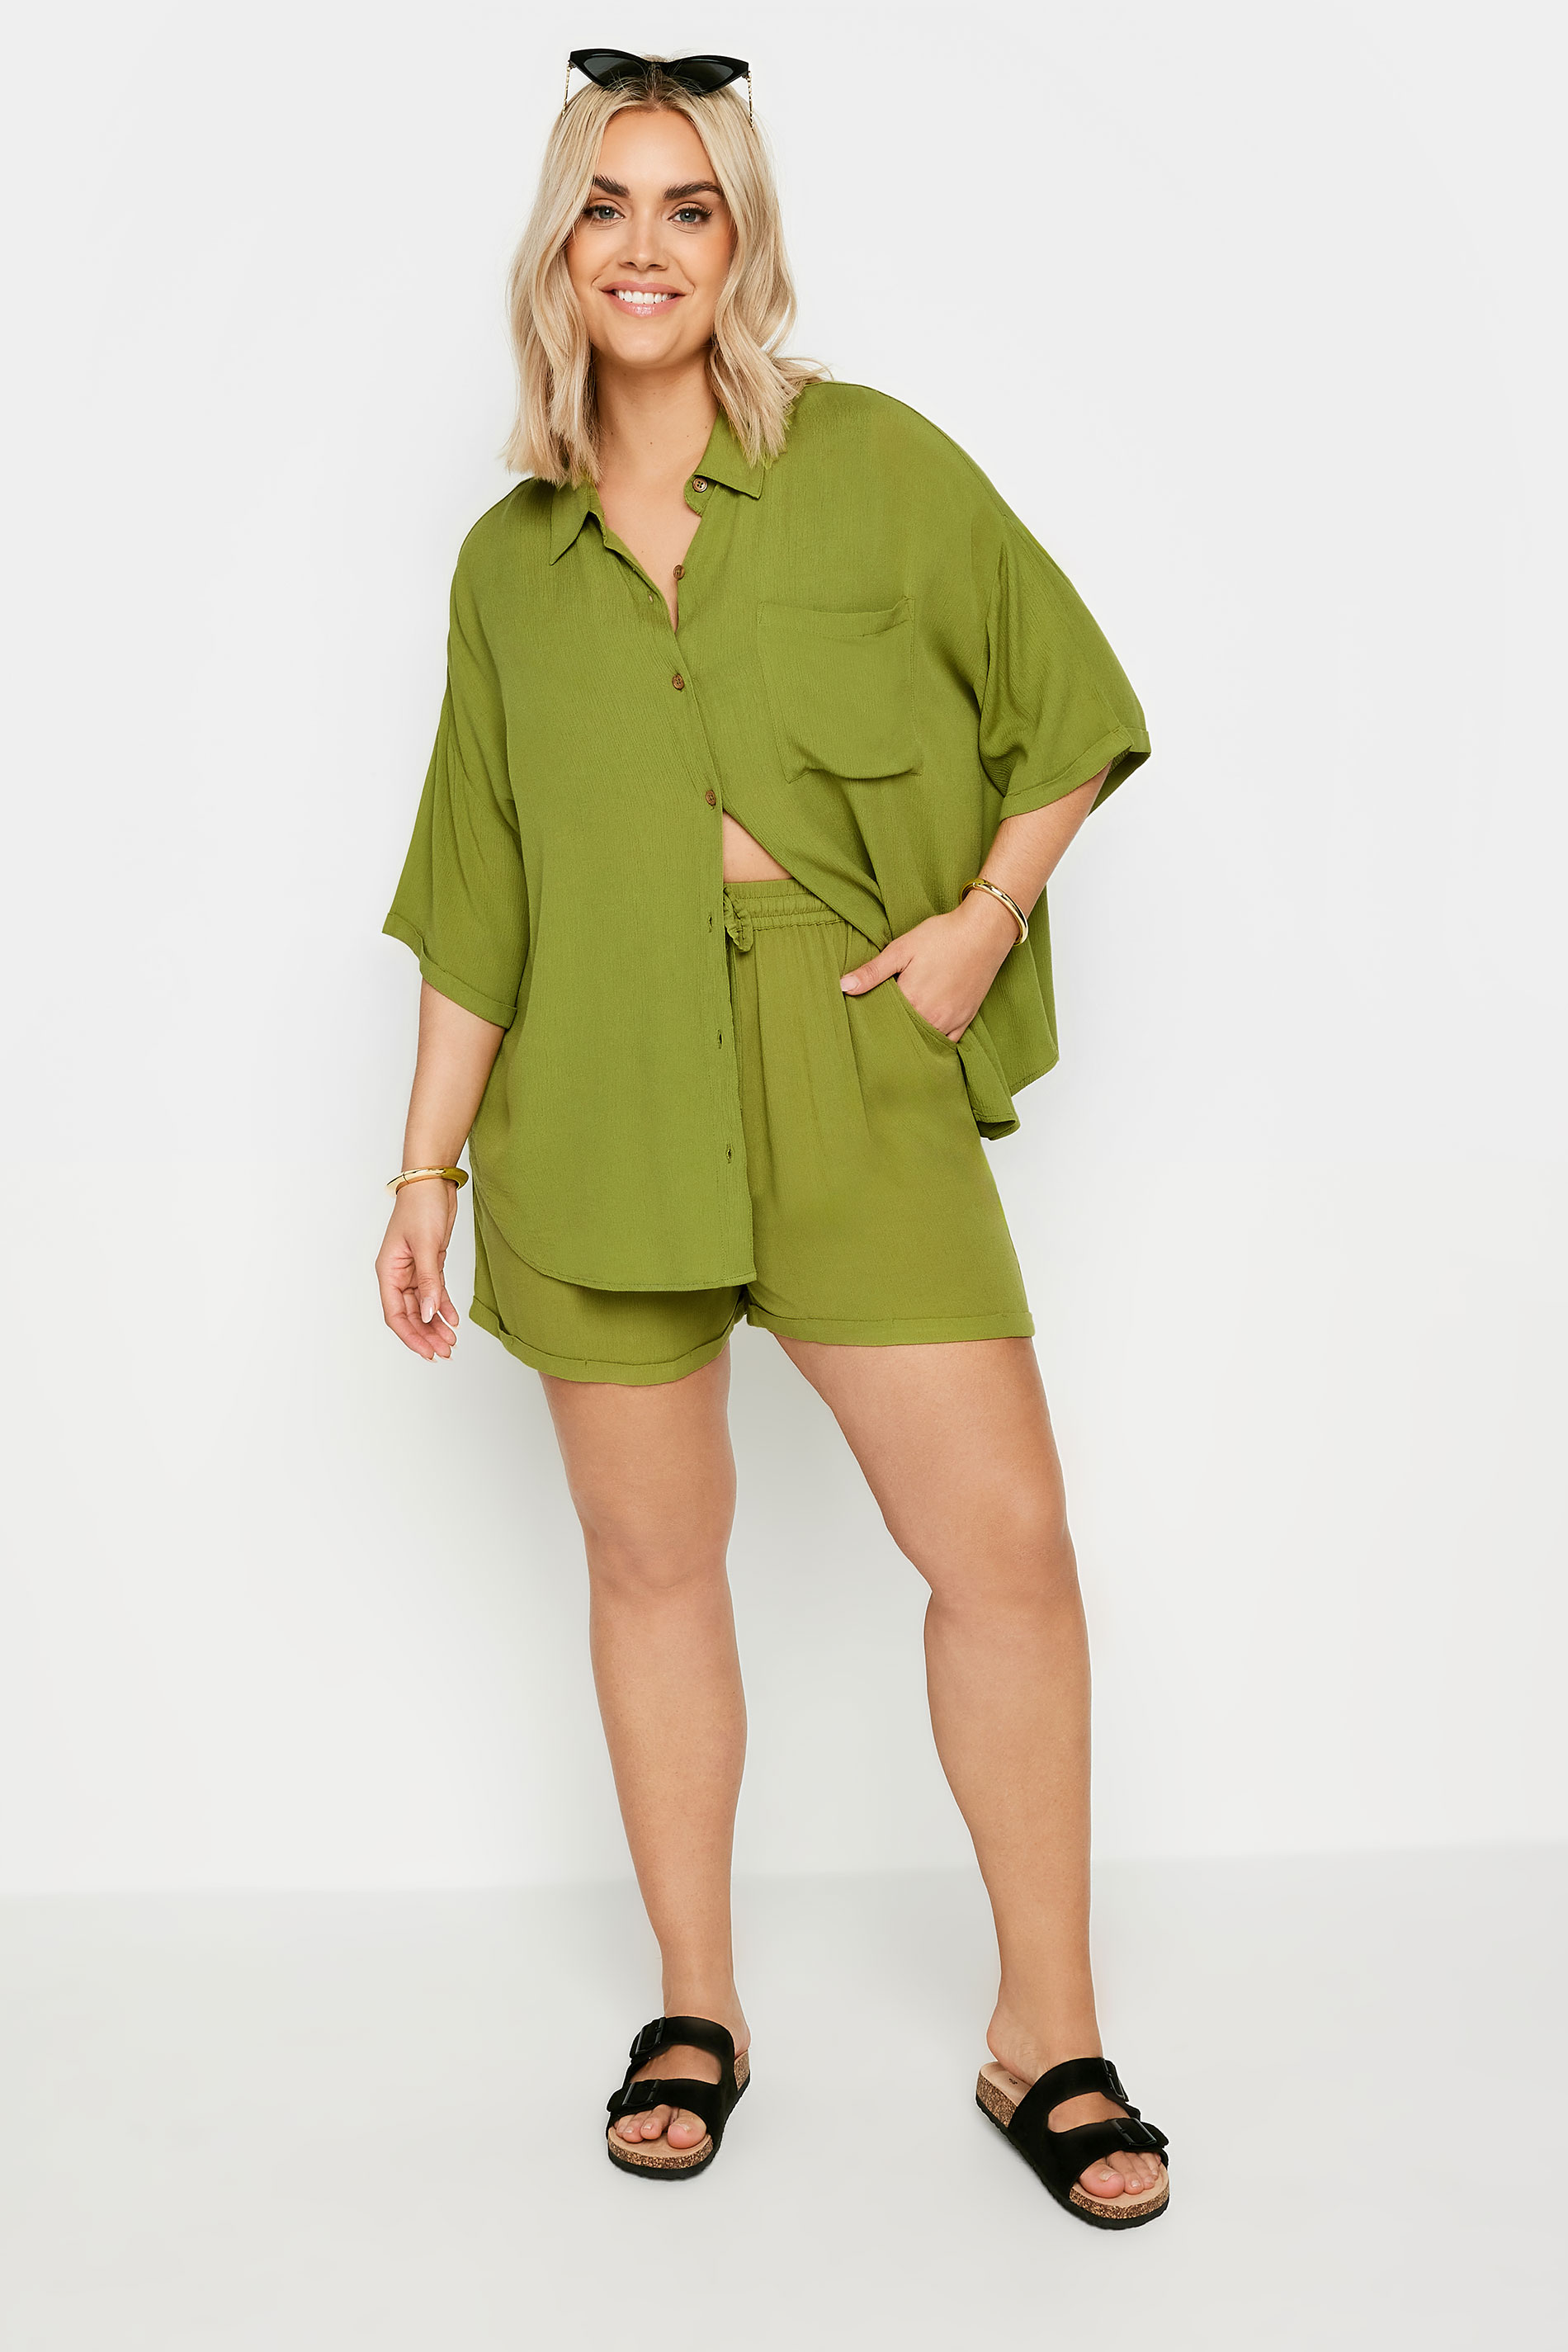 LIMITED COLLECTION Plus Size Olive Green Crinkle Shirt | Yours Clothing 2